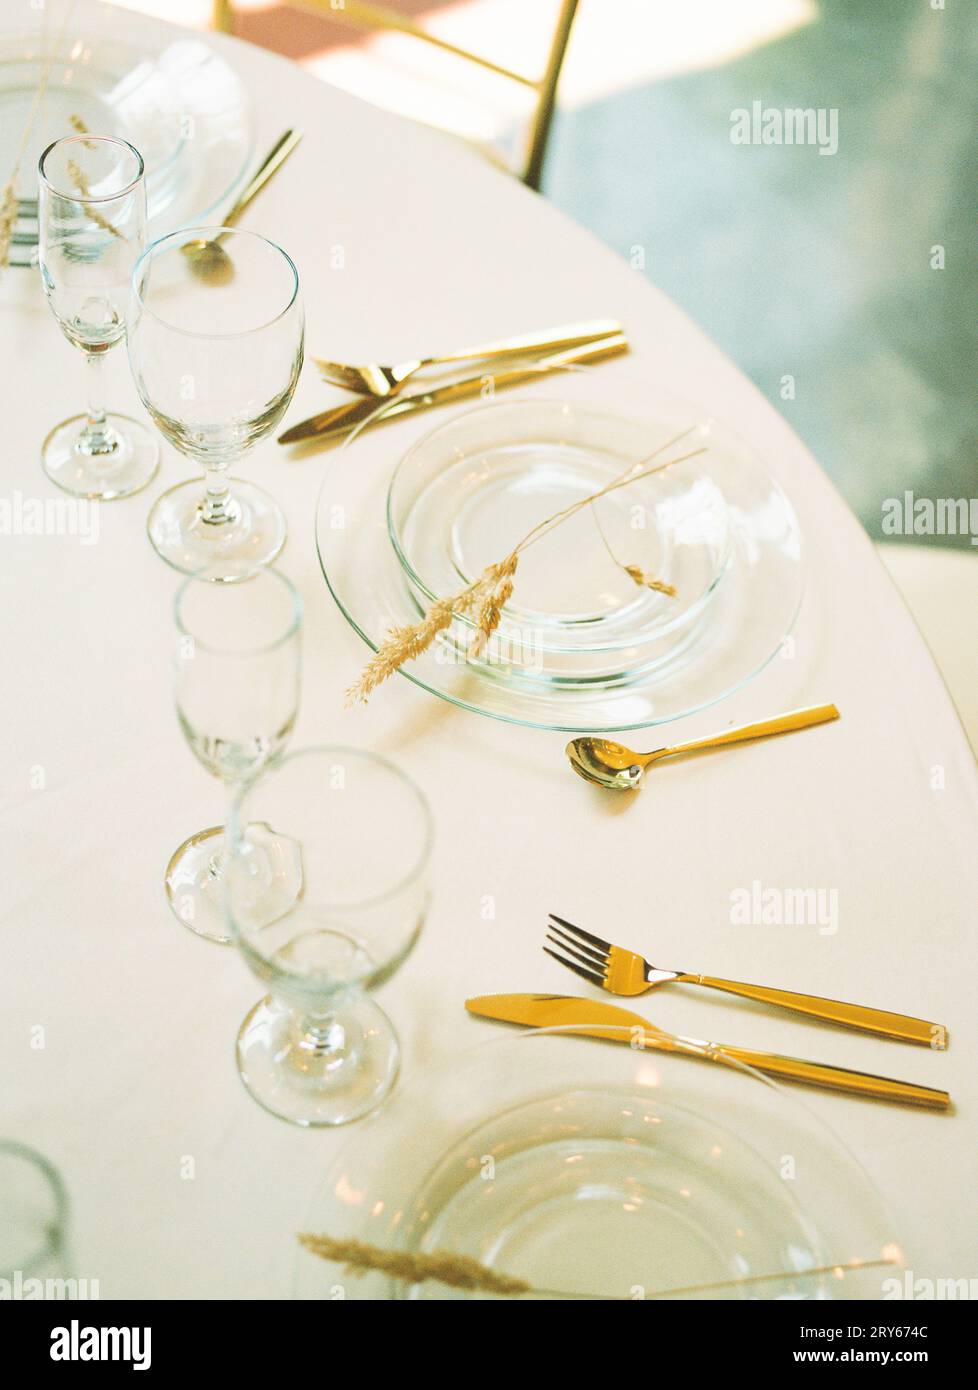 Modern minimalist place setting with clear glass plate, gold fla Stock Photo